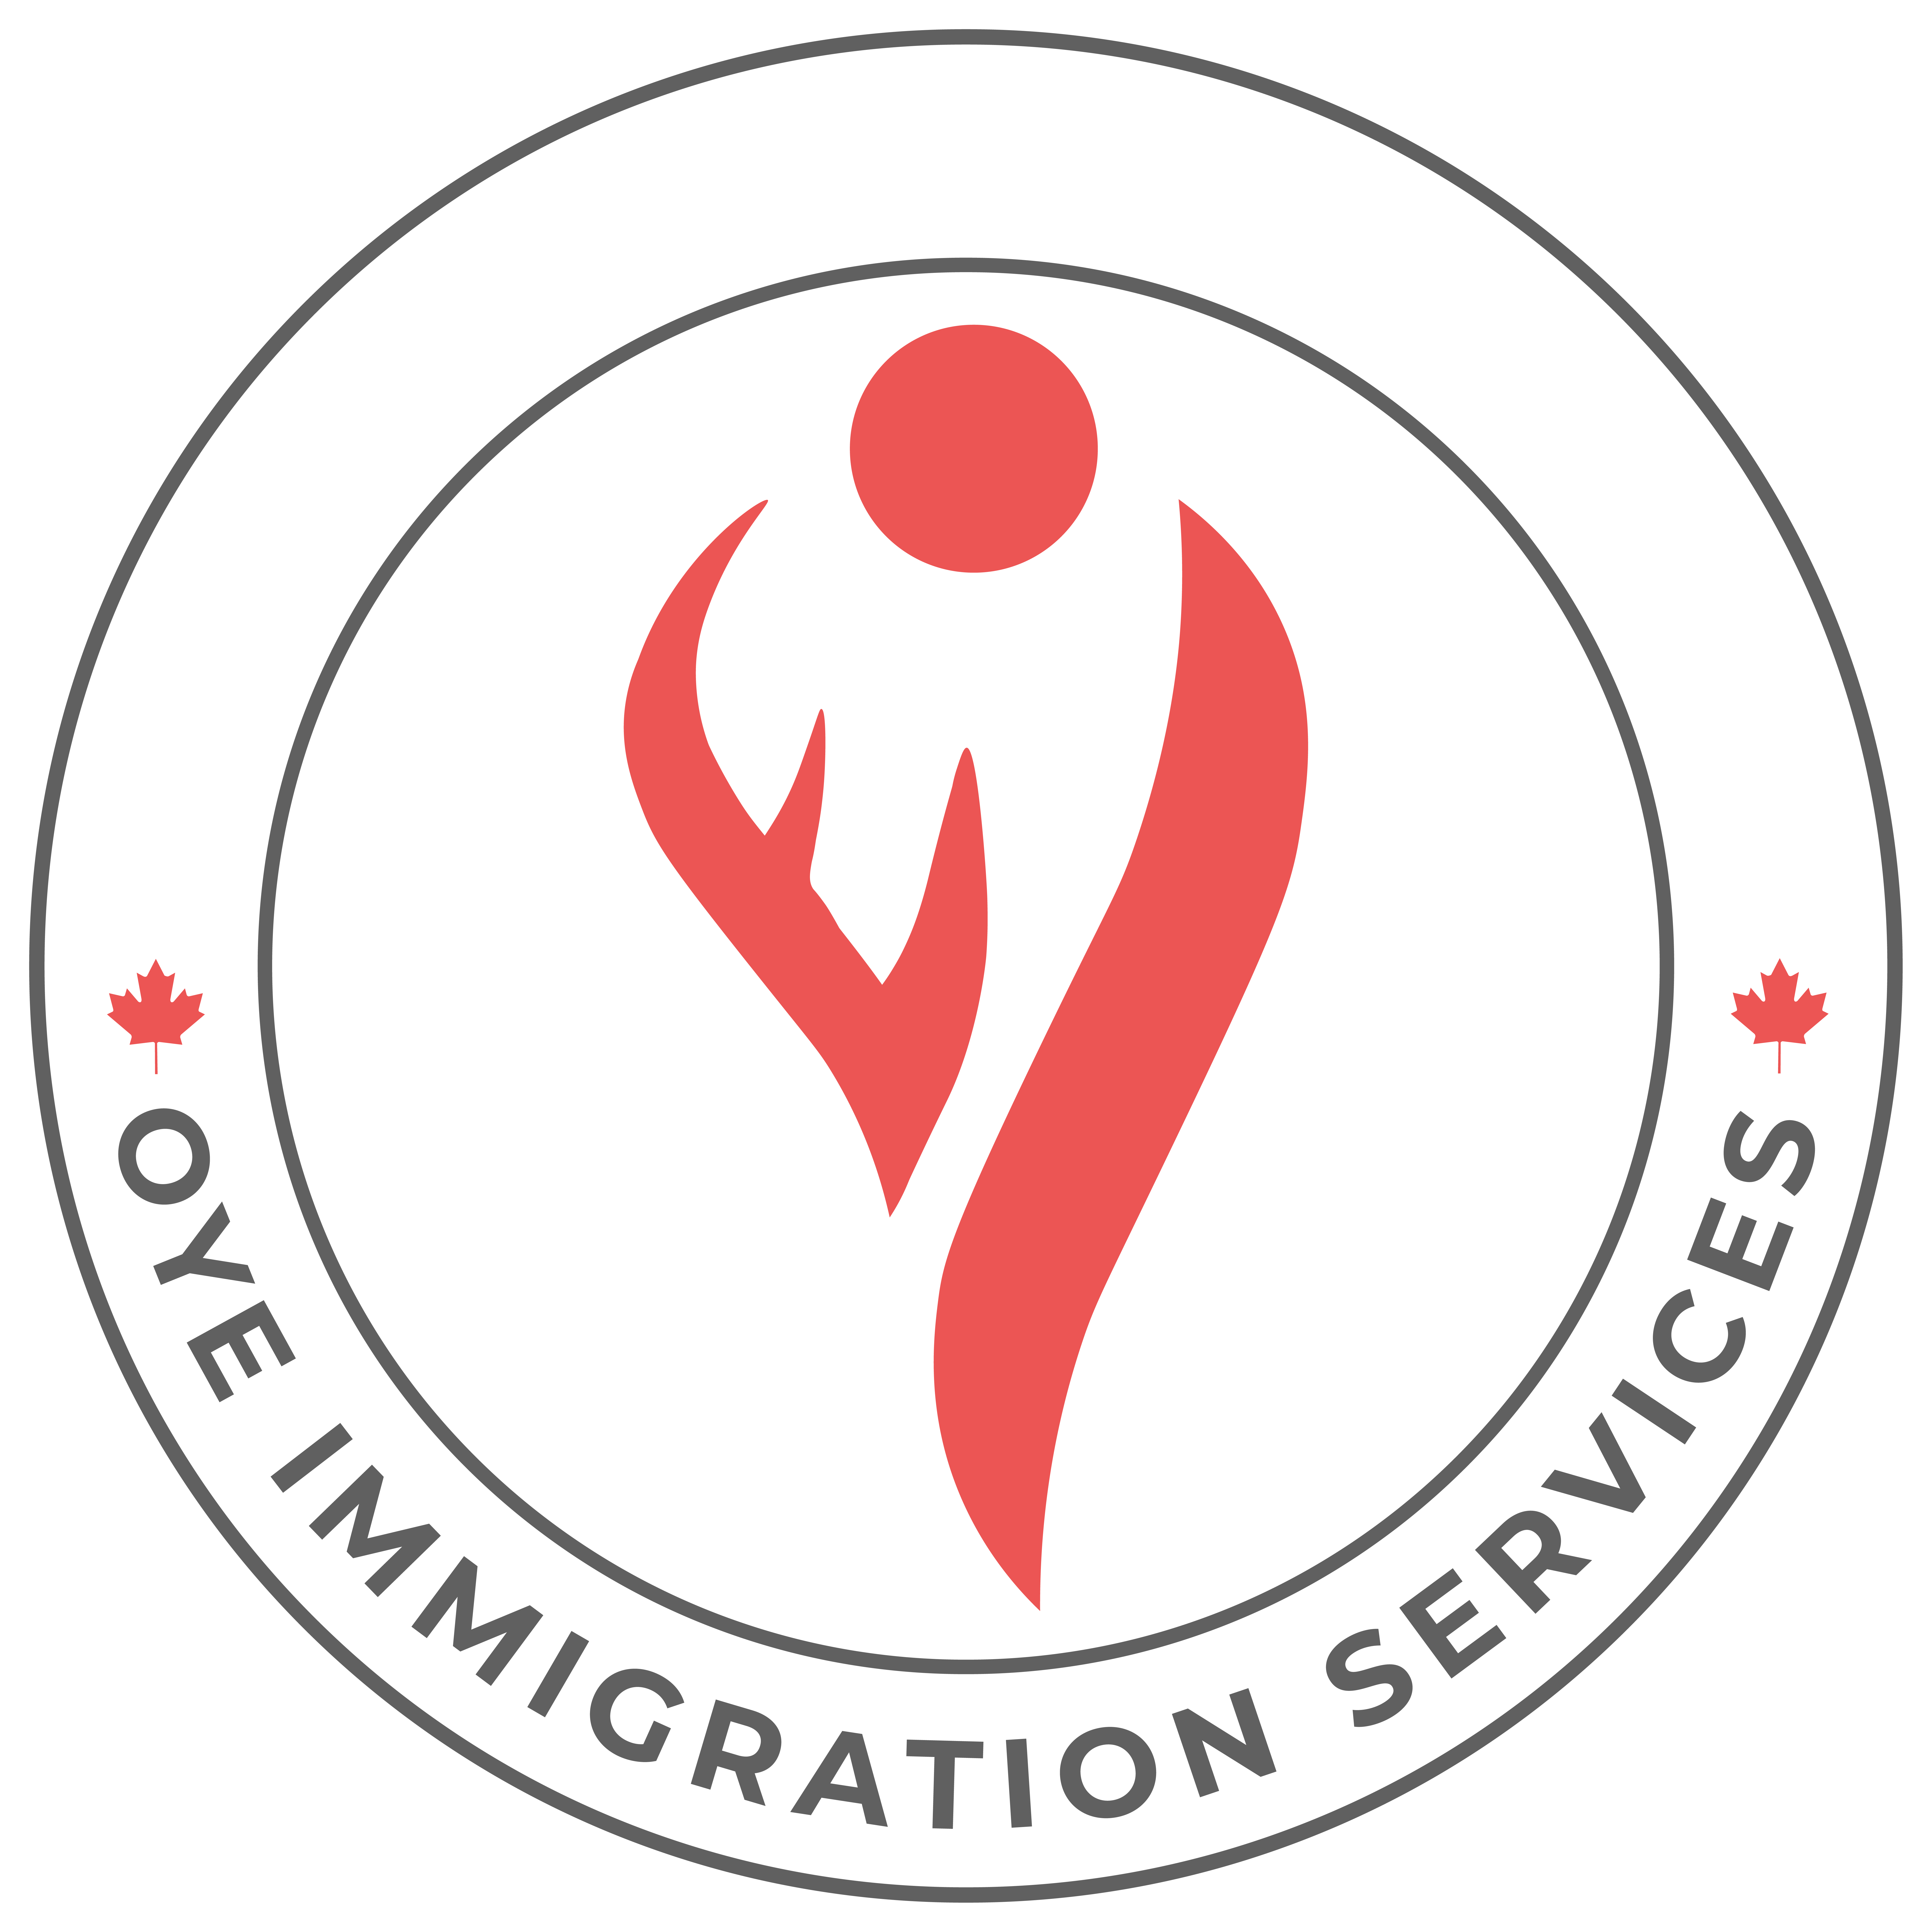 OYE Group Logo immigration services color